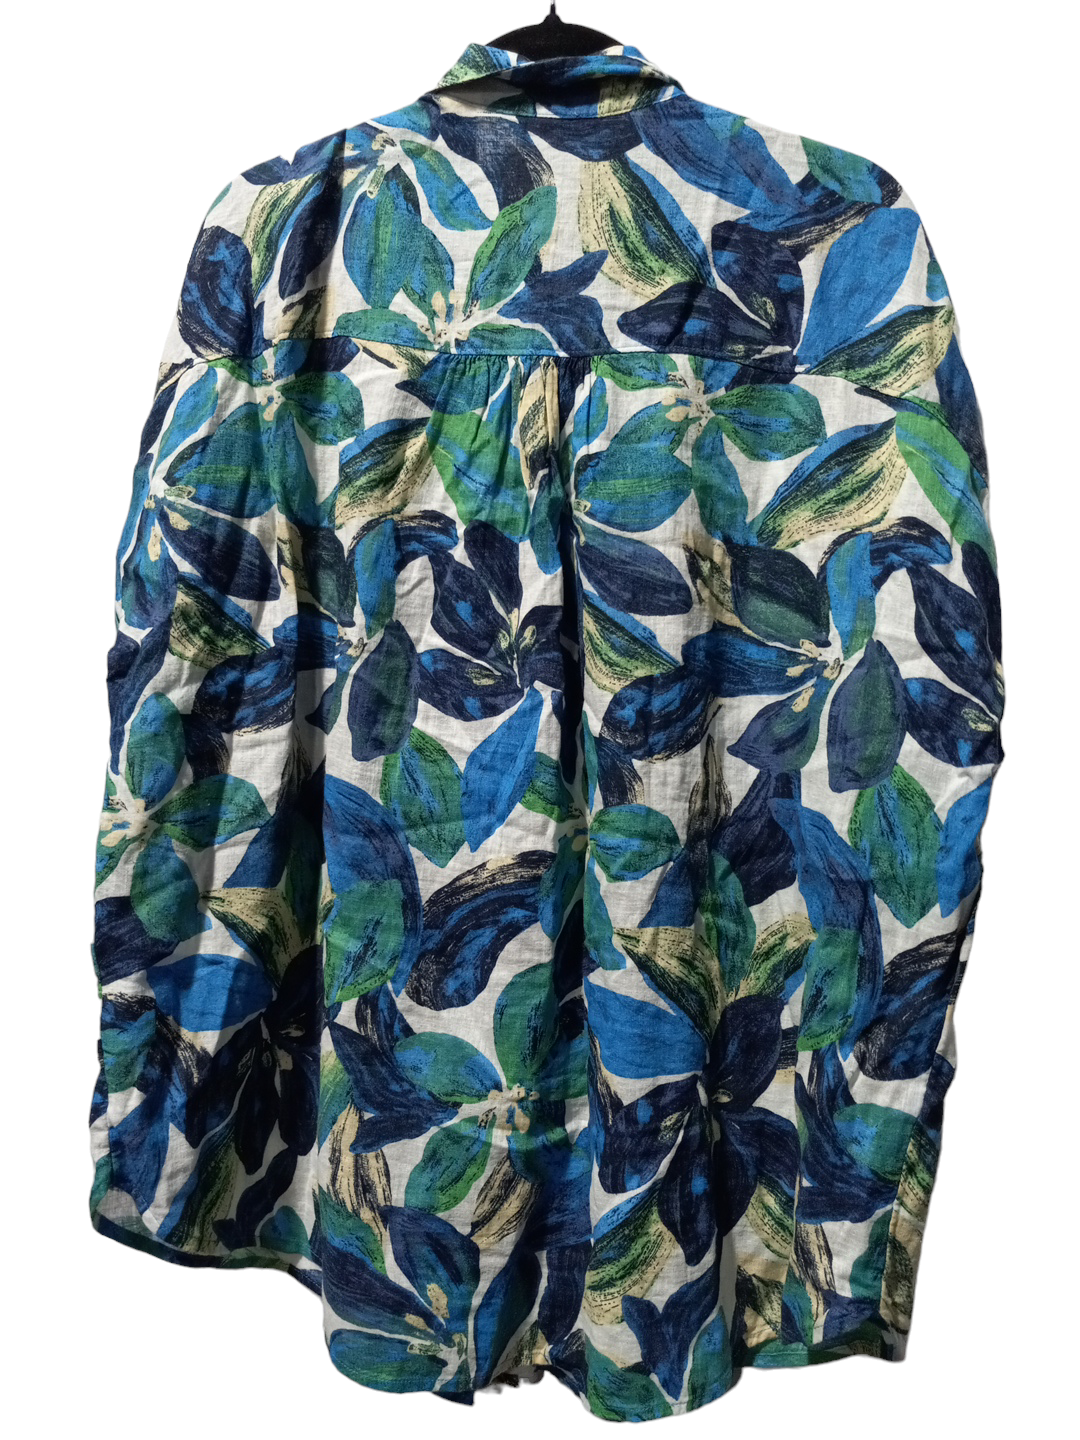 Tropical Print Top Short Sleeve Time And Tru, Size 2x